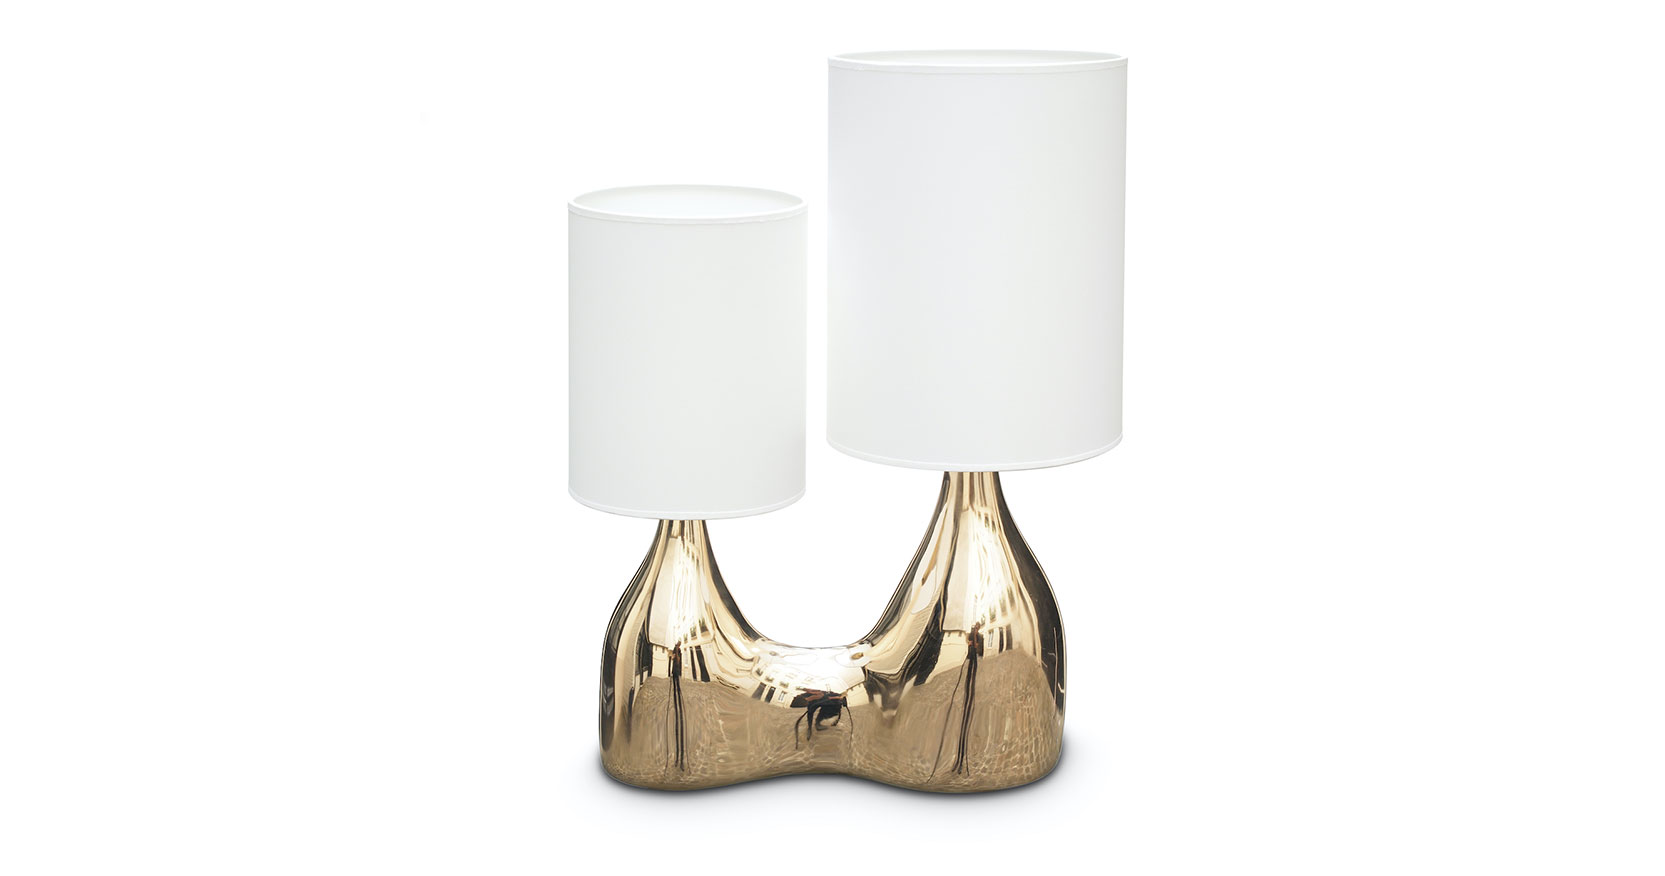 Matt Sindall lamp sculpture in polished bronze. Two lamp bases are fused together like a pair of different sized bottles each with a white cylindrical lampshade, their sizes corresponding to the base.